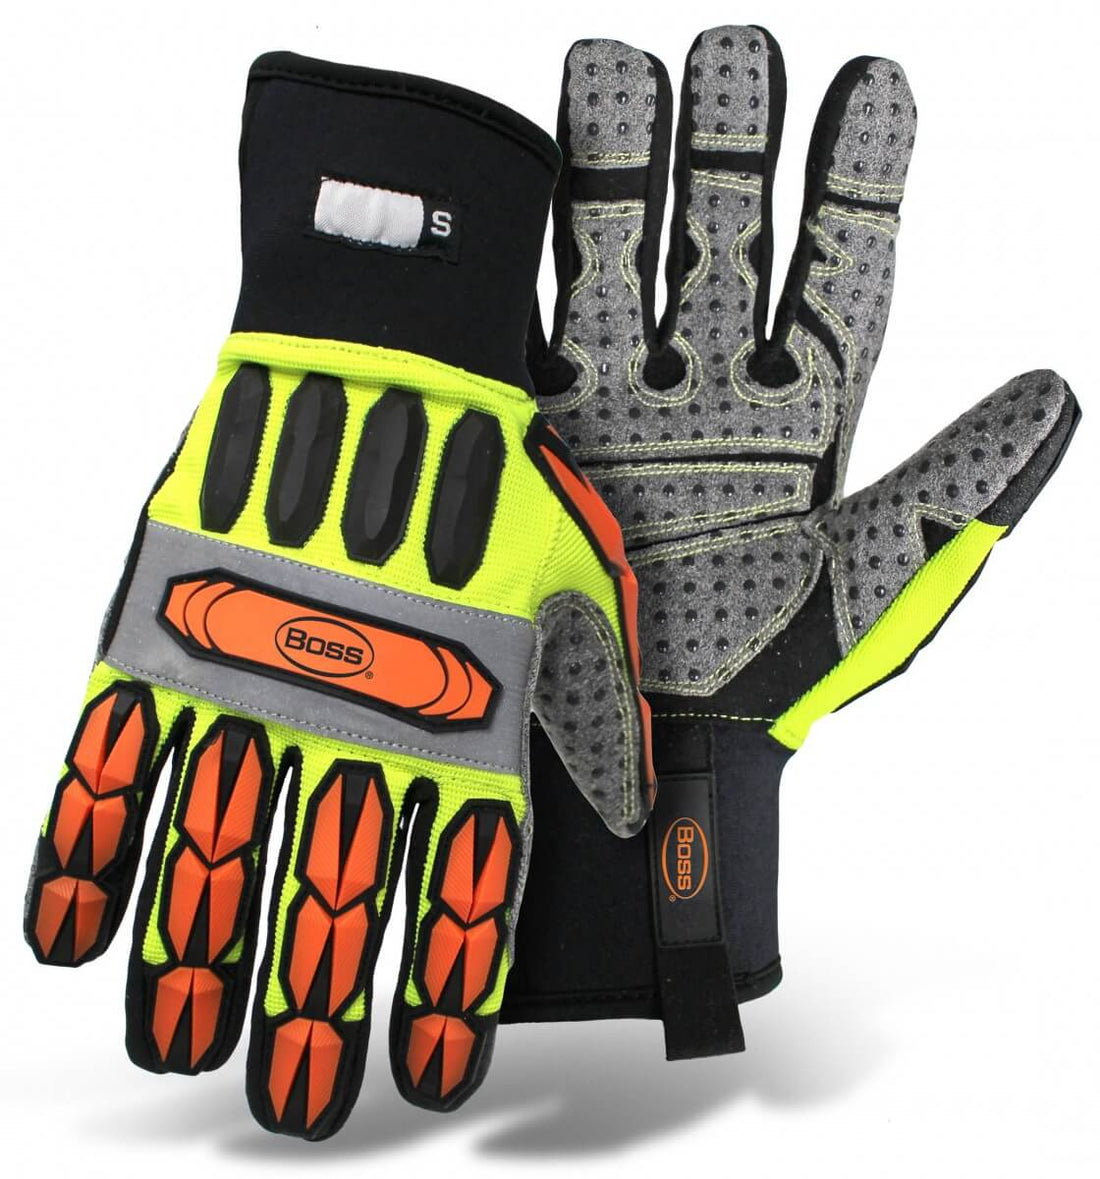 The Perfect Preventative Knuckle Buster Glove: The Boss Impact 1JM600